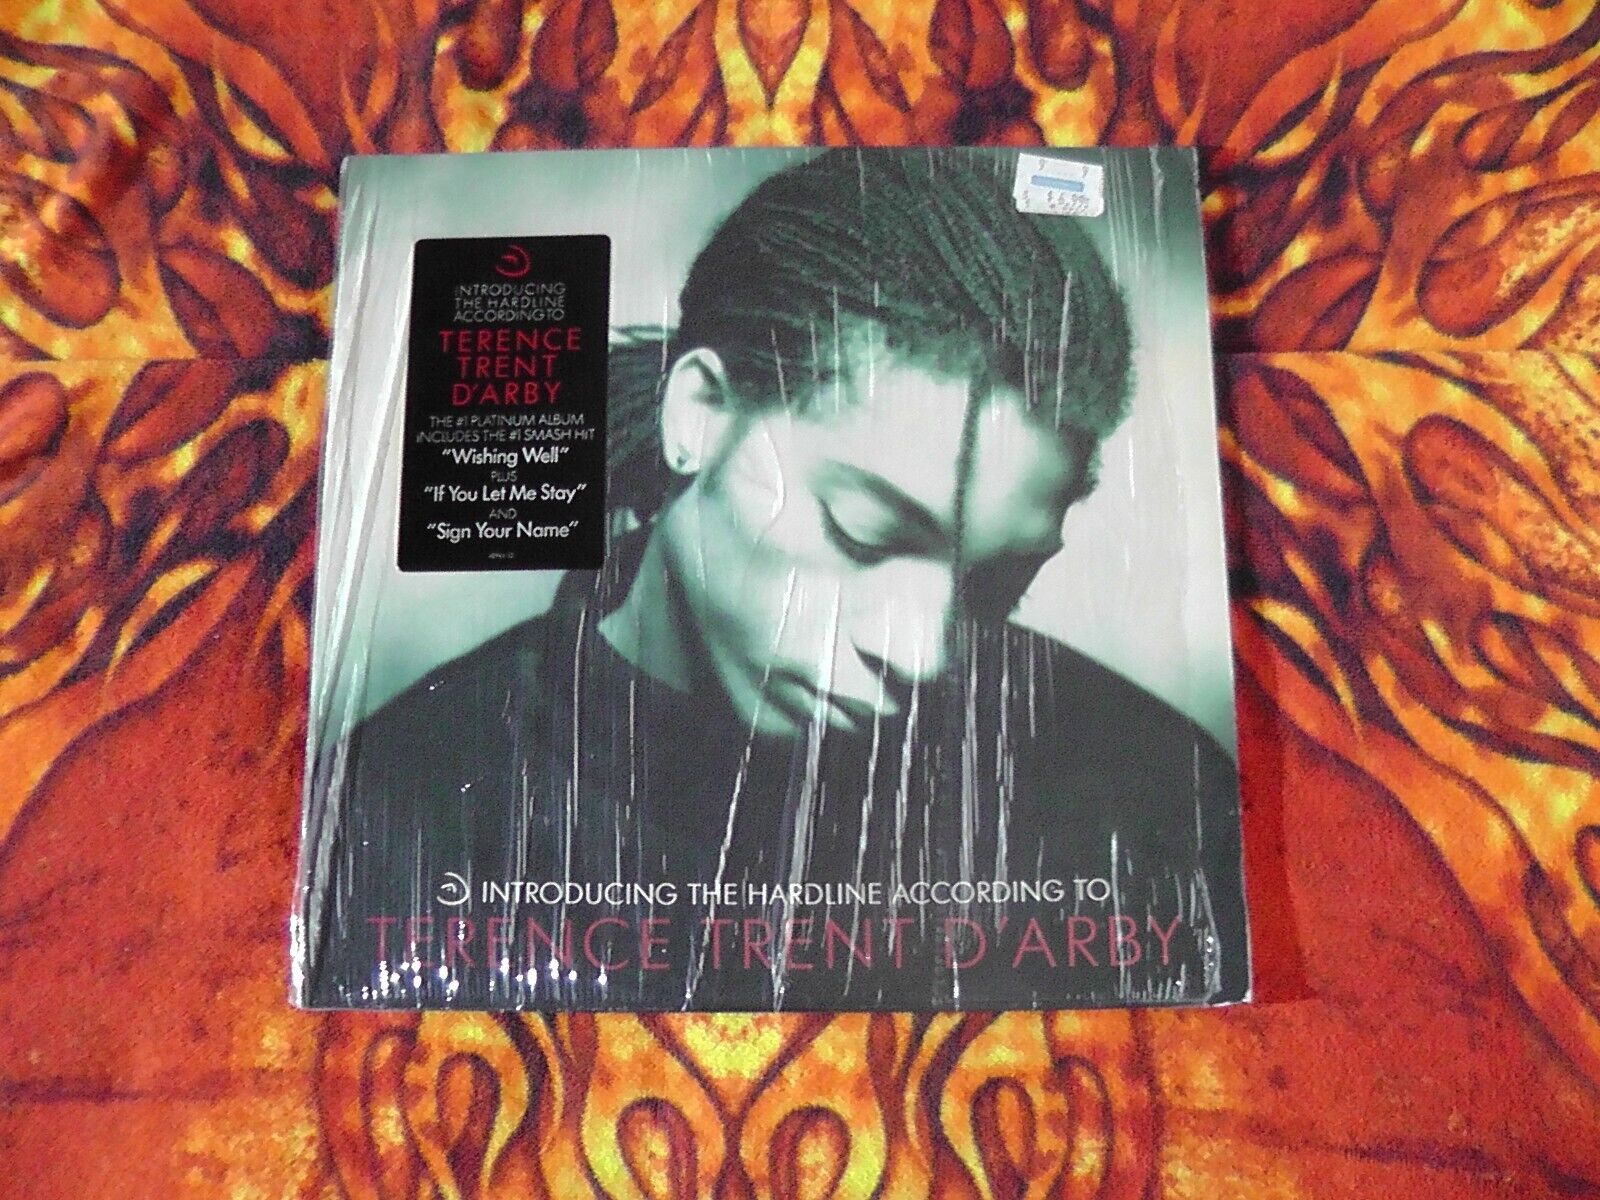 Terence Trent D'Arby Introducing The Hardline According To LP OC40964